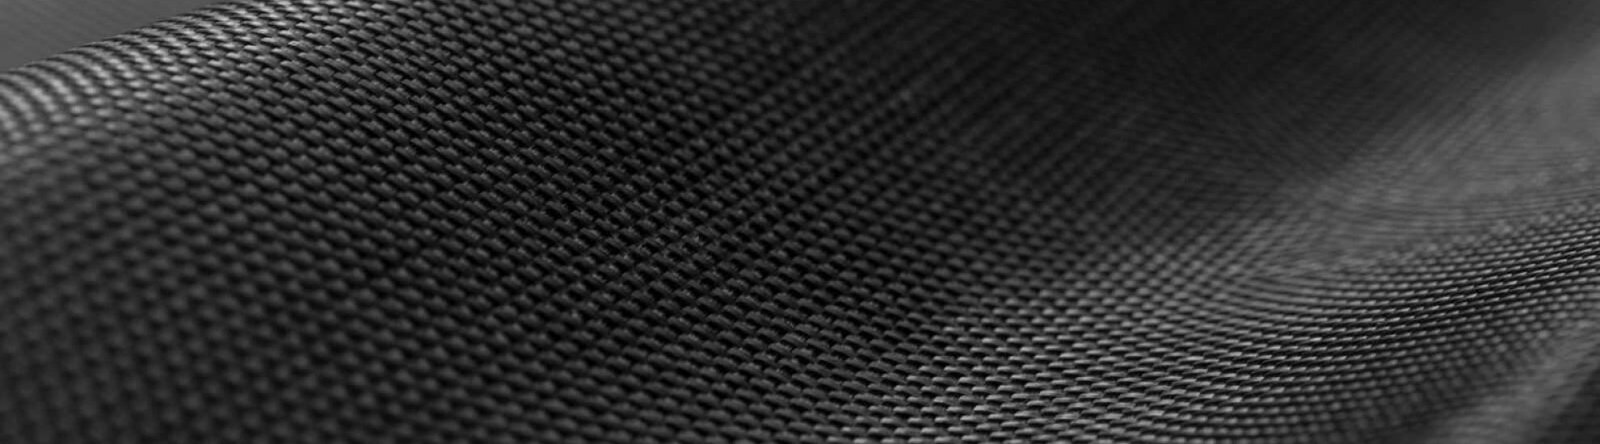 Carbon fiber composite raw material as a background or texture